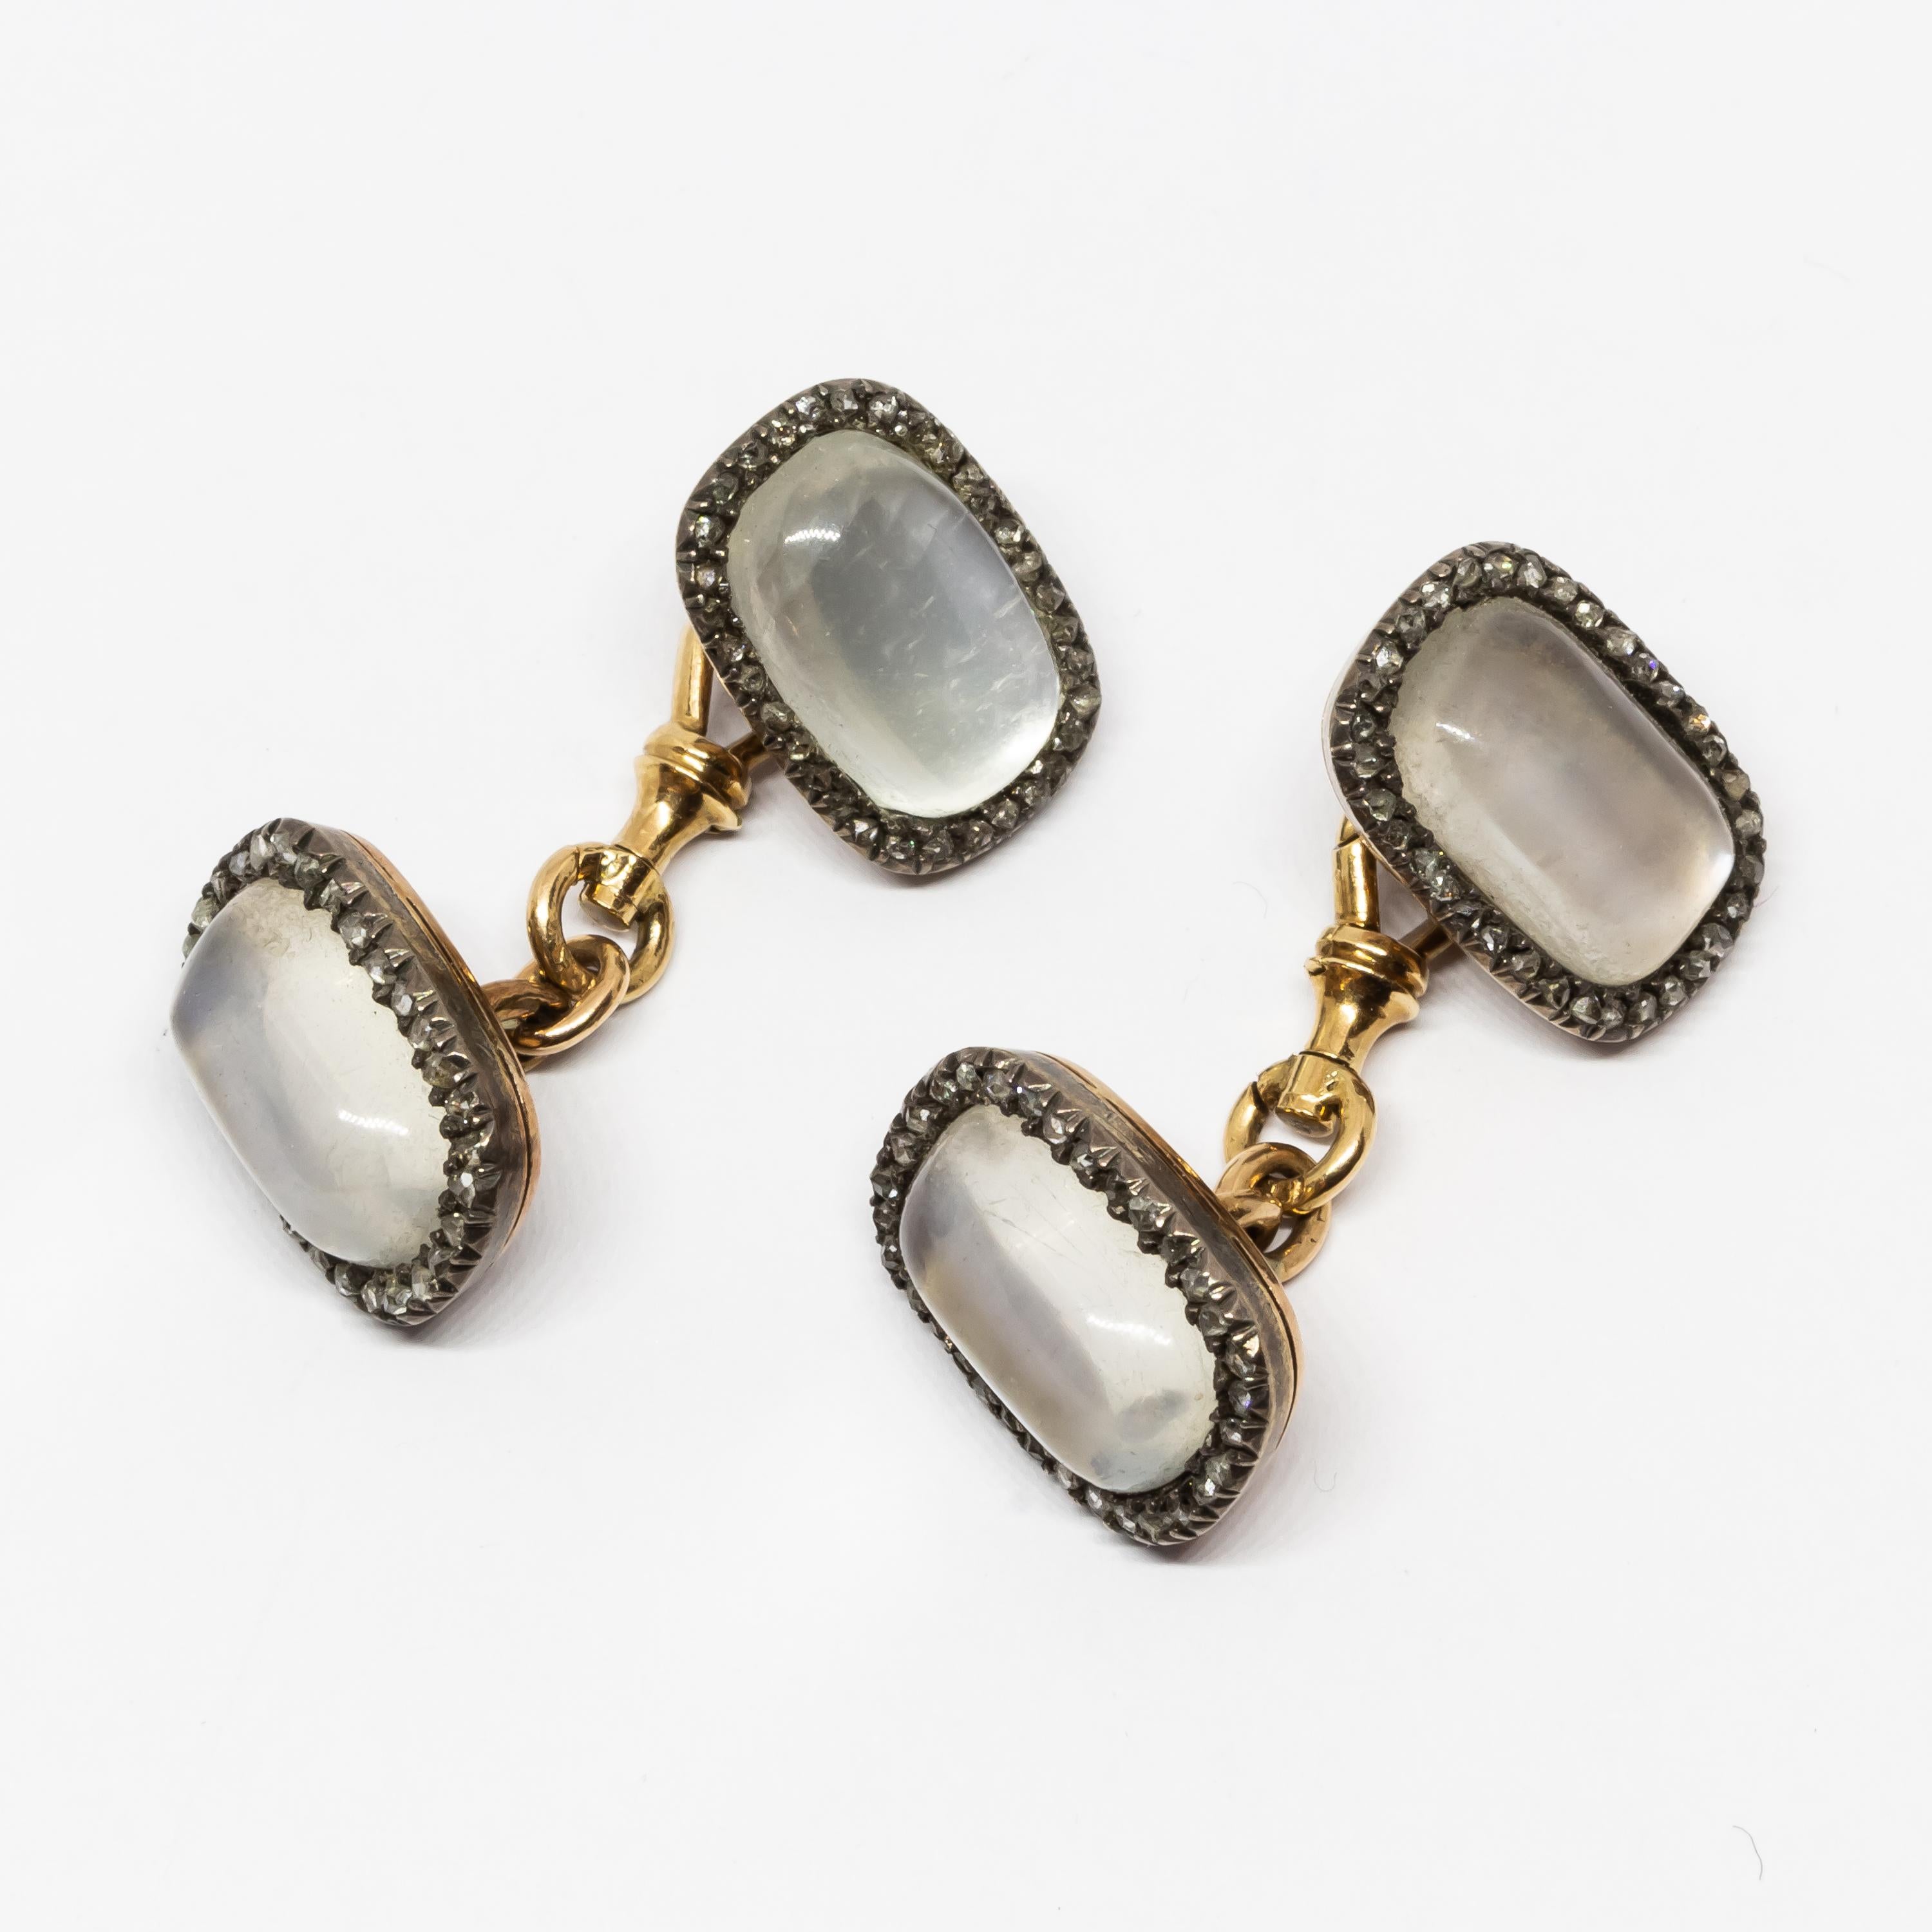 Cabochon Russian Moonstone, Diamond, Gold and Silver Cufflinks, Circa 1900 For Sale